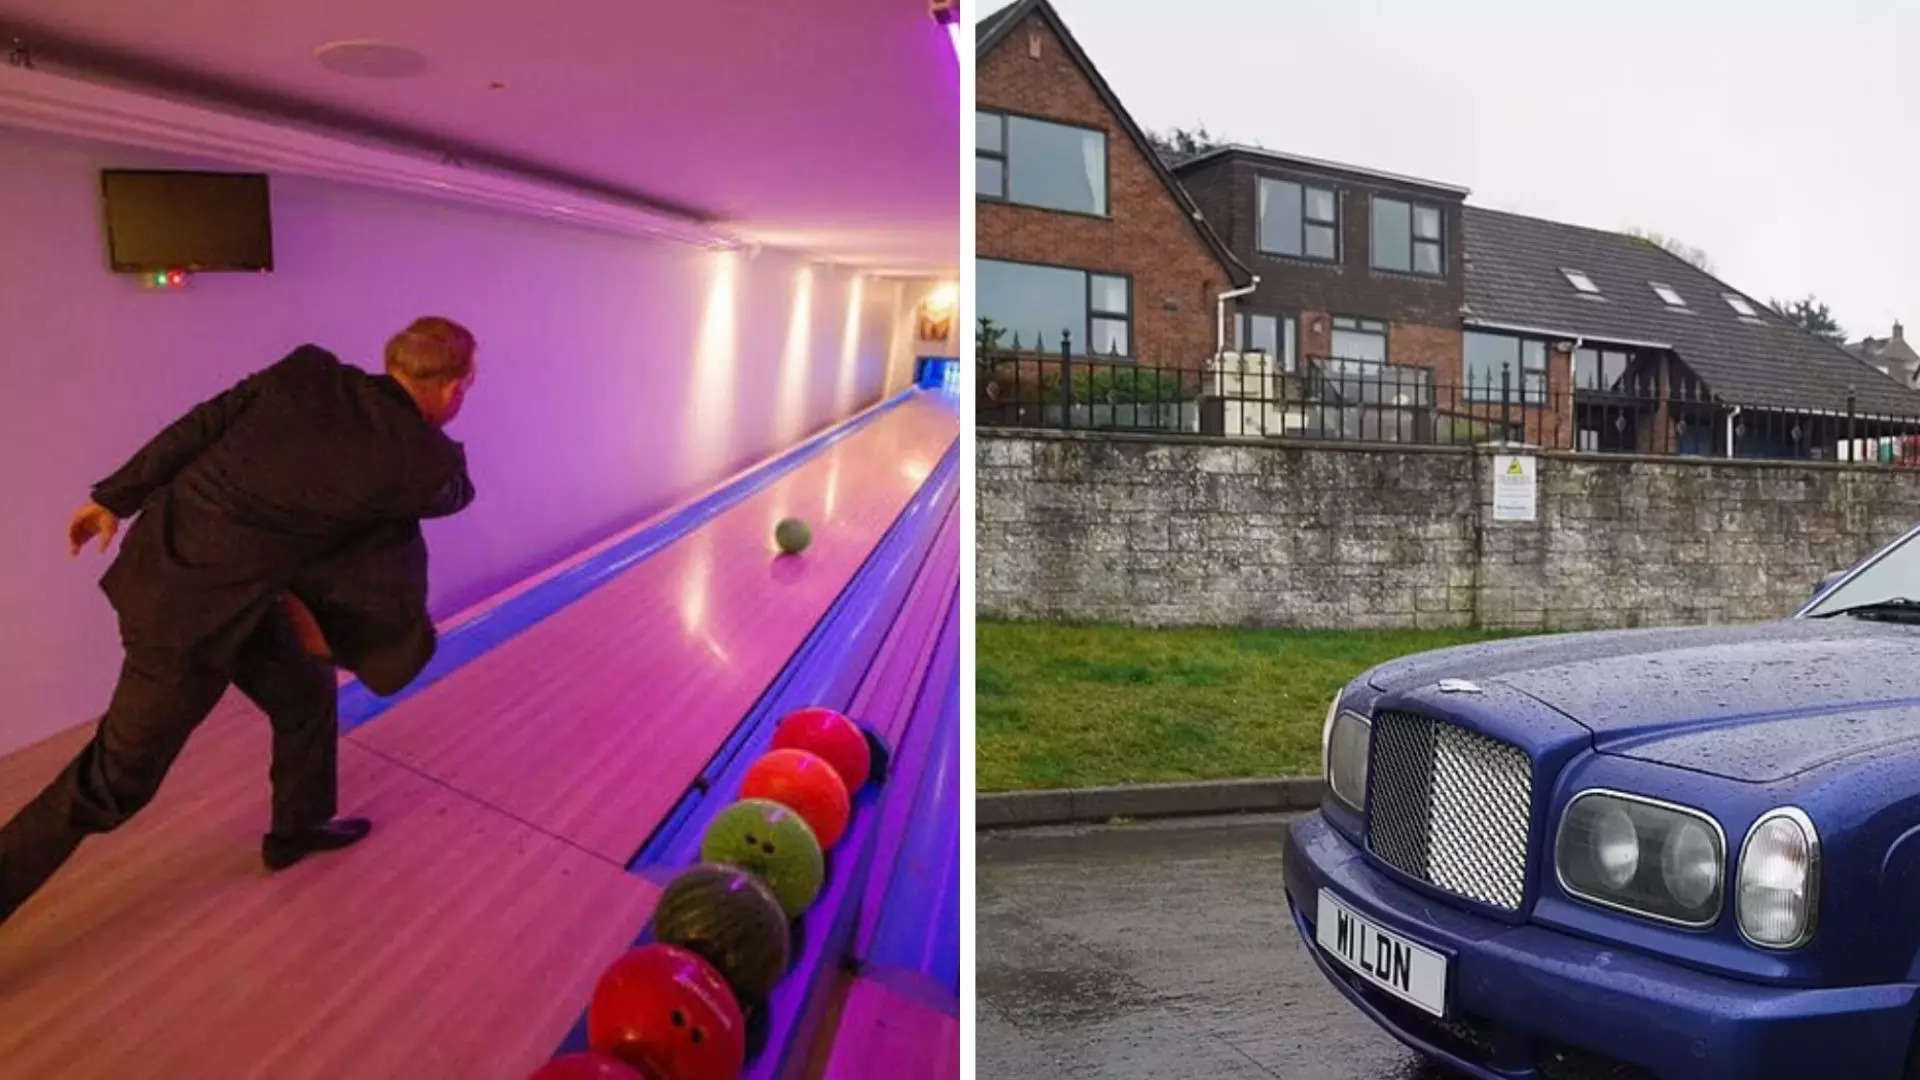 Graham Wildin's bowling alley (left) and Bentley (right)| Image courtsy: Gloucestershire Live (L); Daily Mail (R)